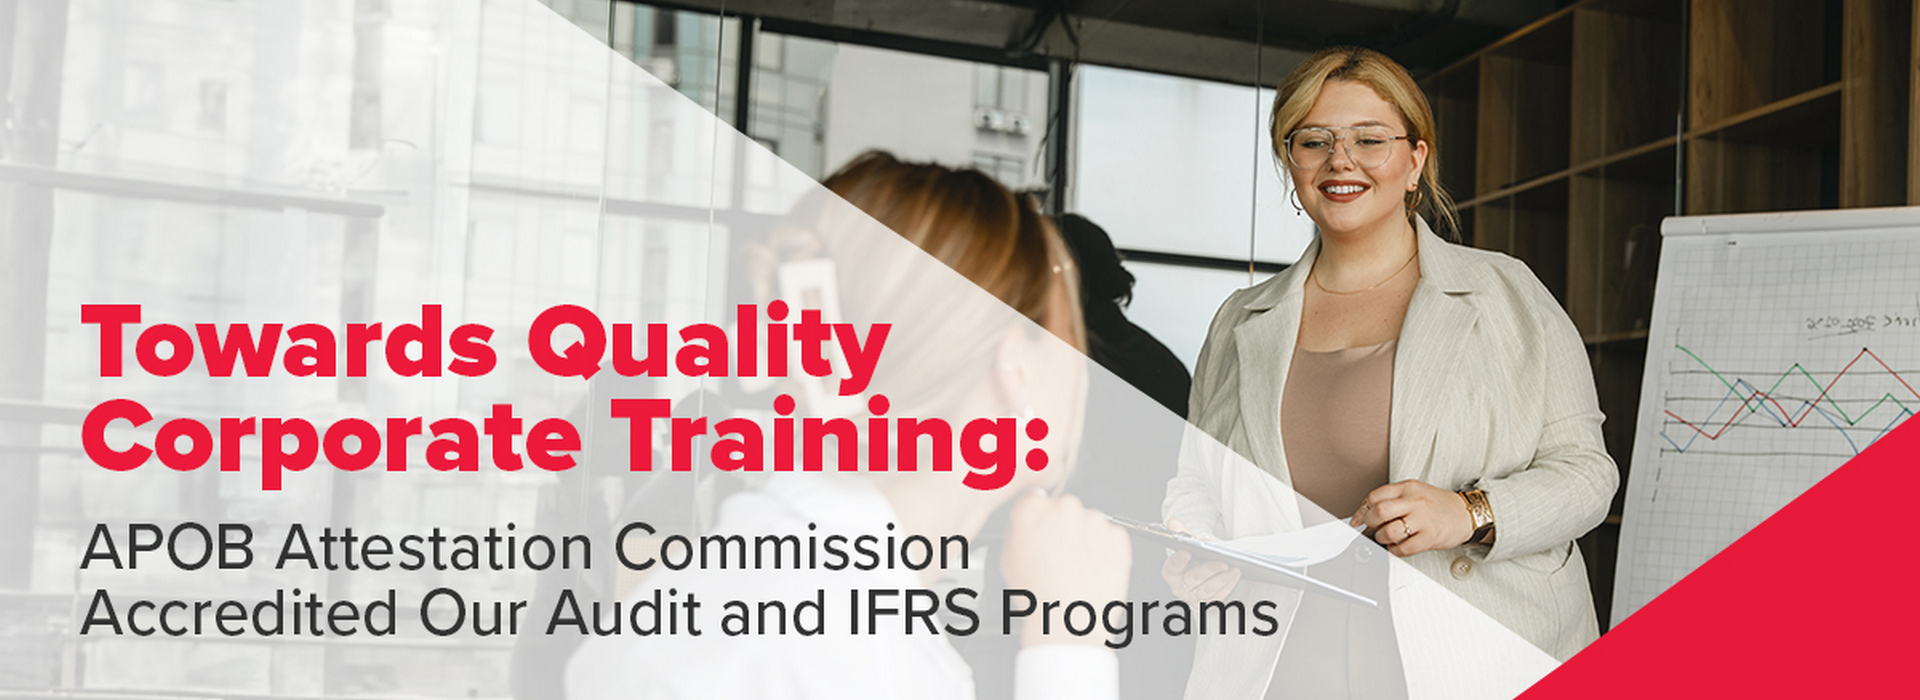 Towards Quality Corporate Training: APOB Attestation Commission Accredited Our Audit and IFRS Programs